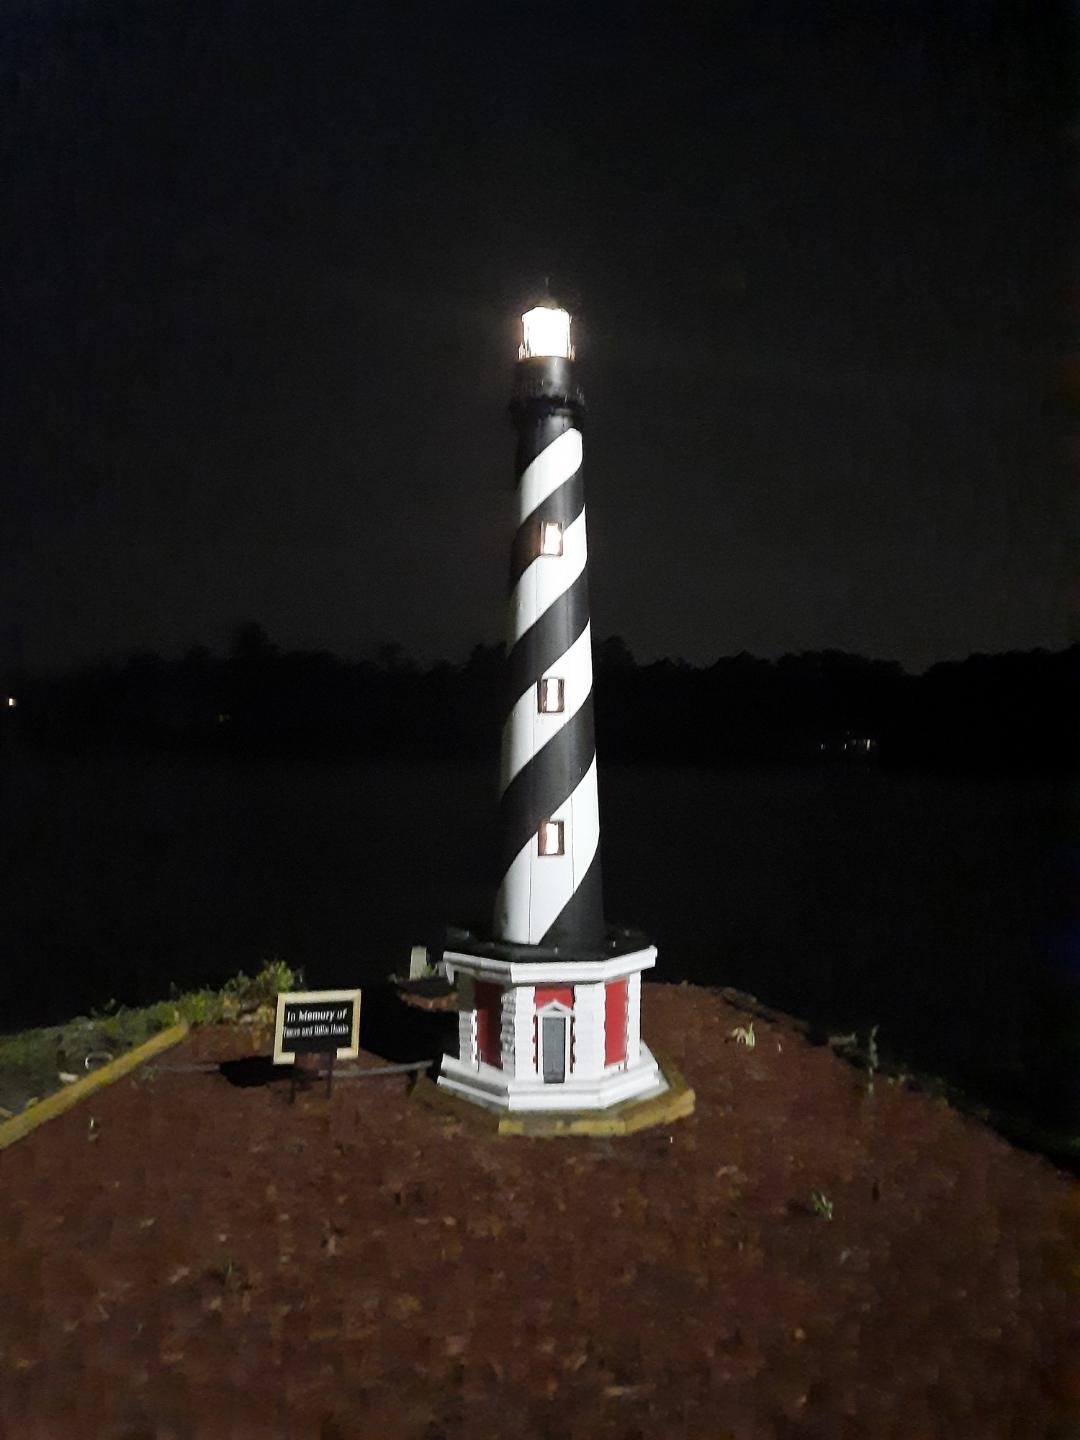 The lighthouse at night.